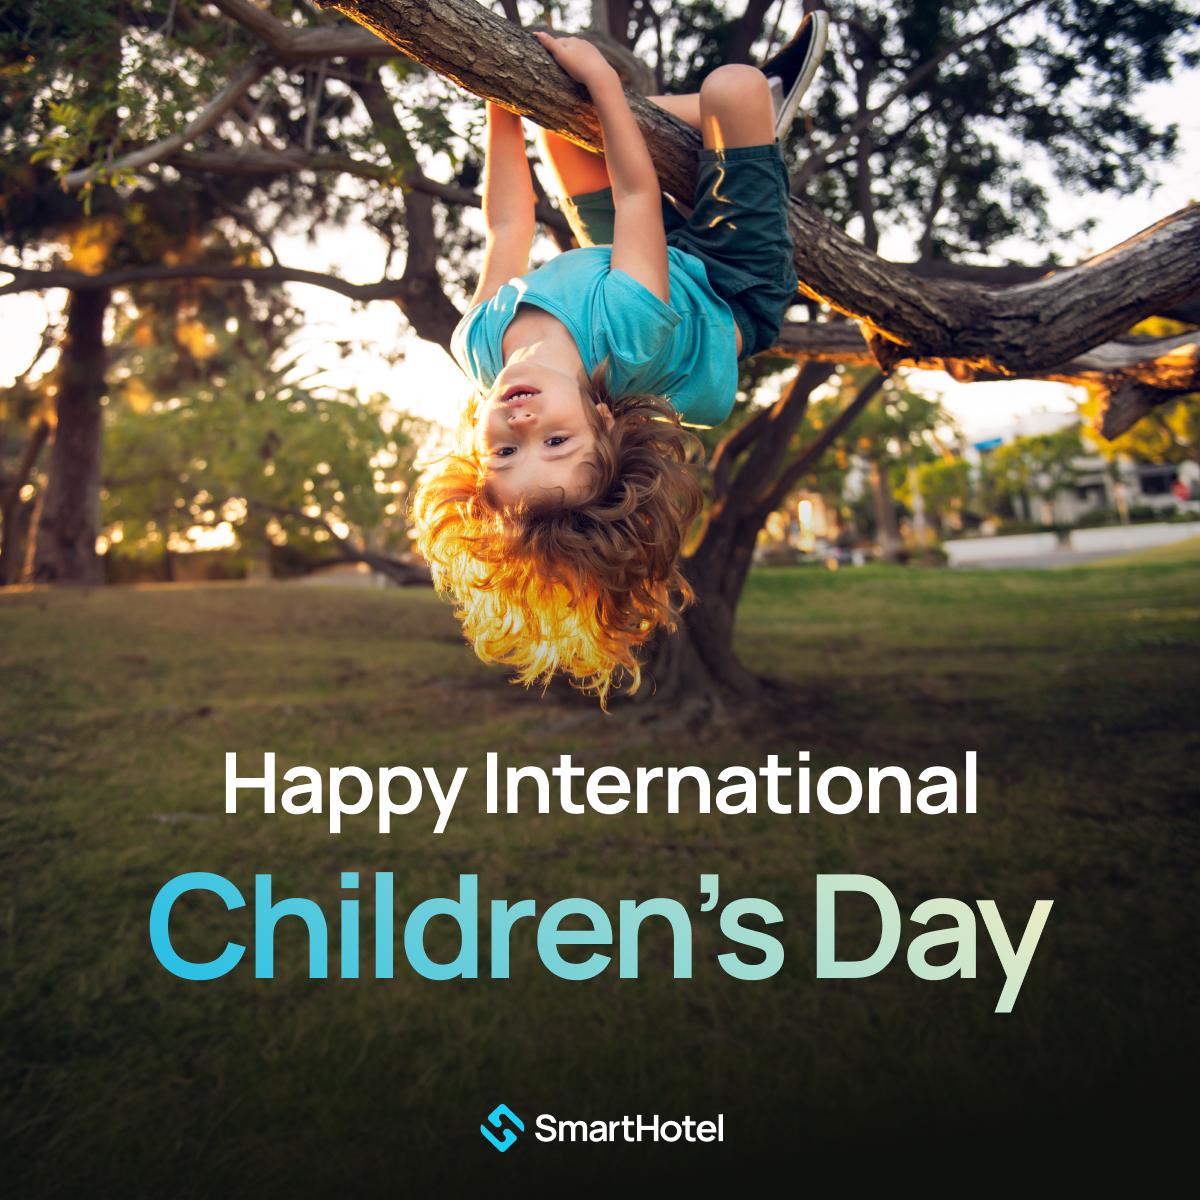 Product: Unforgettable Children’s Day Experiences at Your Hotel - SmartHotel